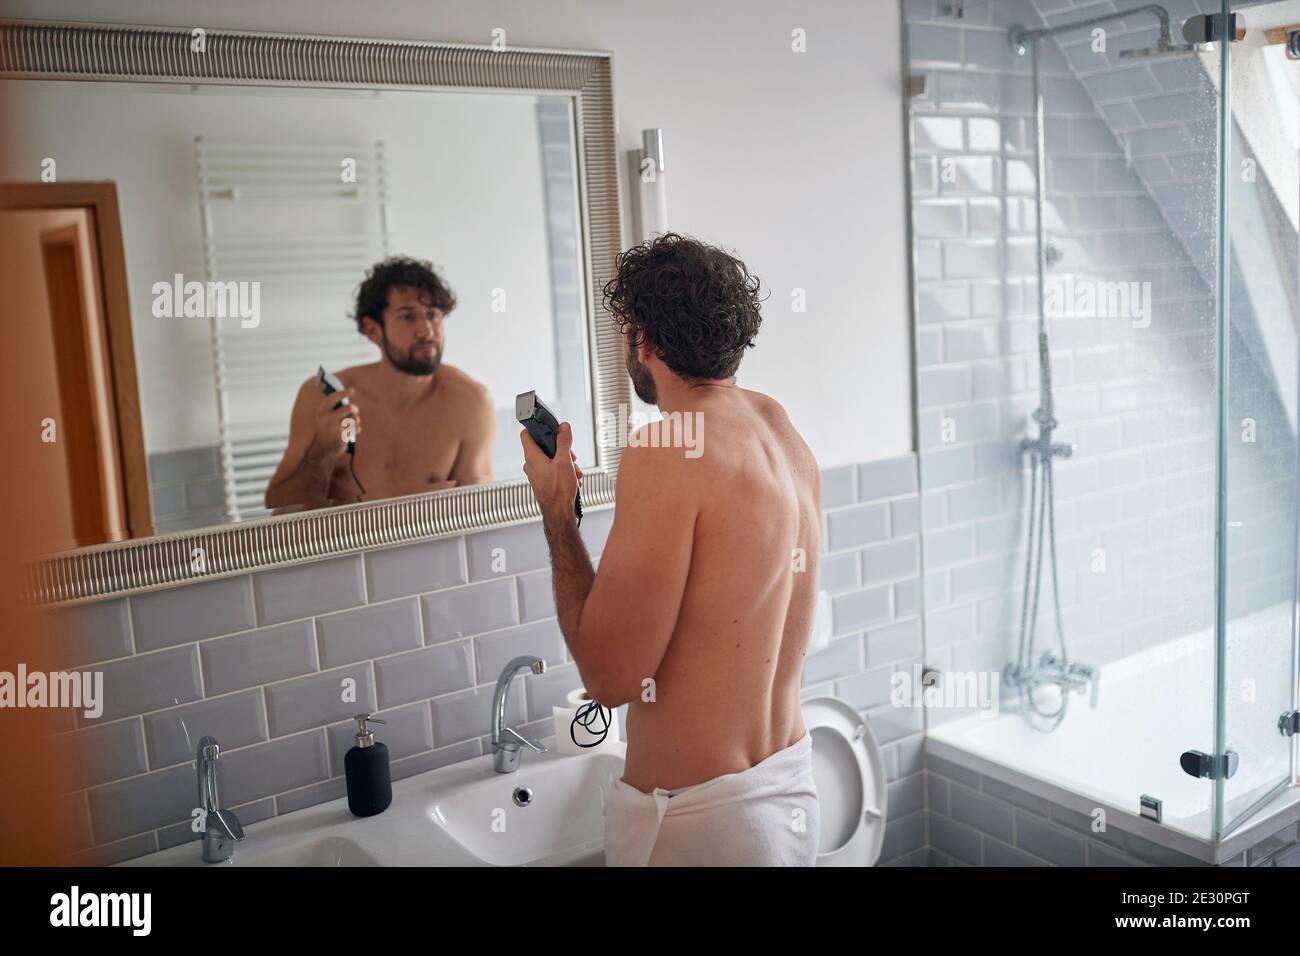 Caucasian topless man shaving with shaver in the bathroom Stock Photo